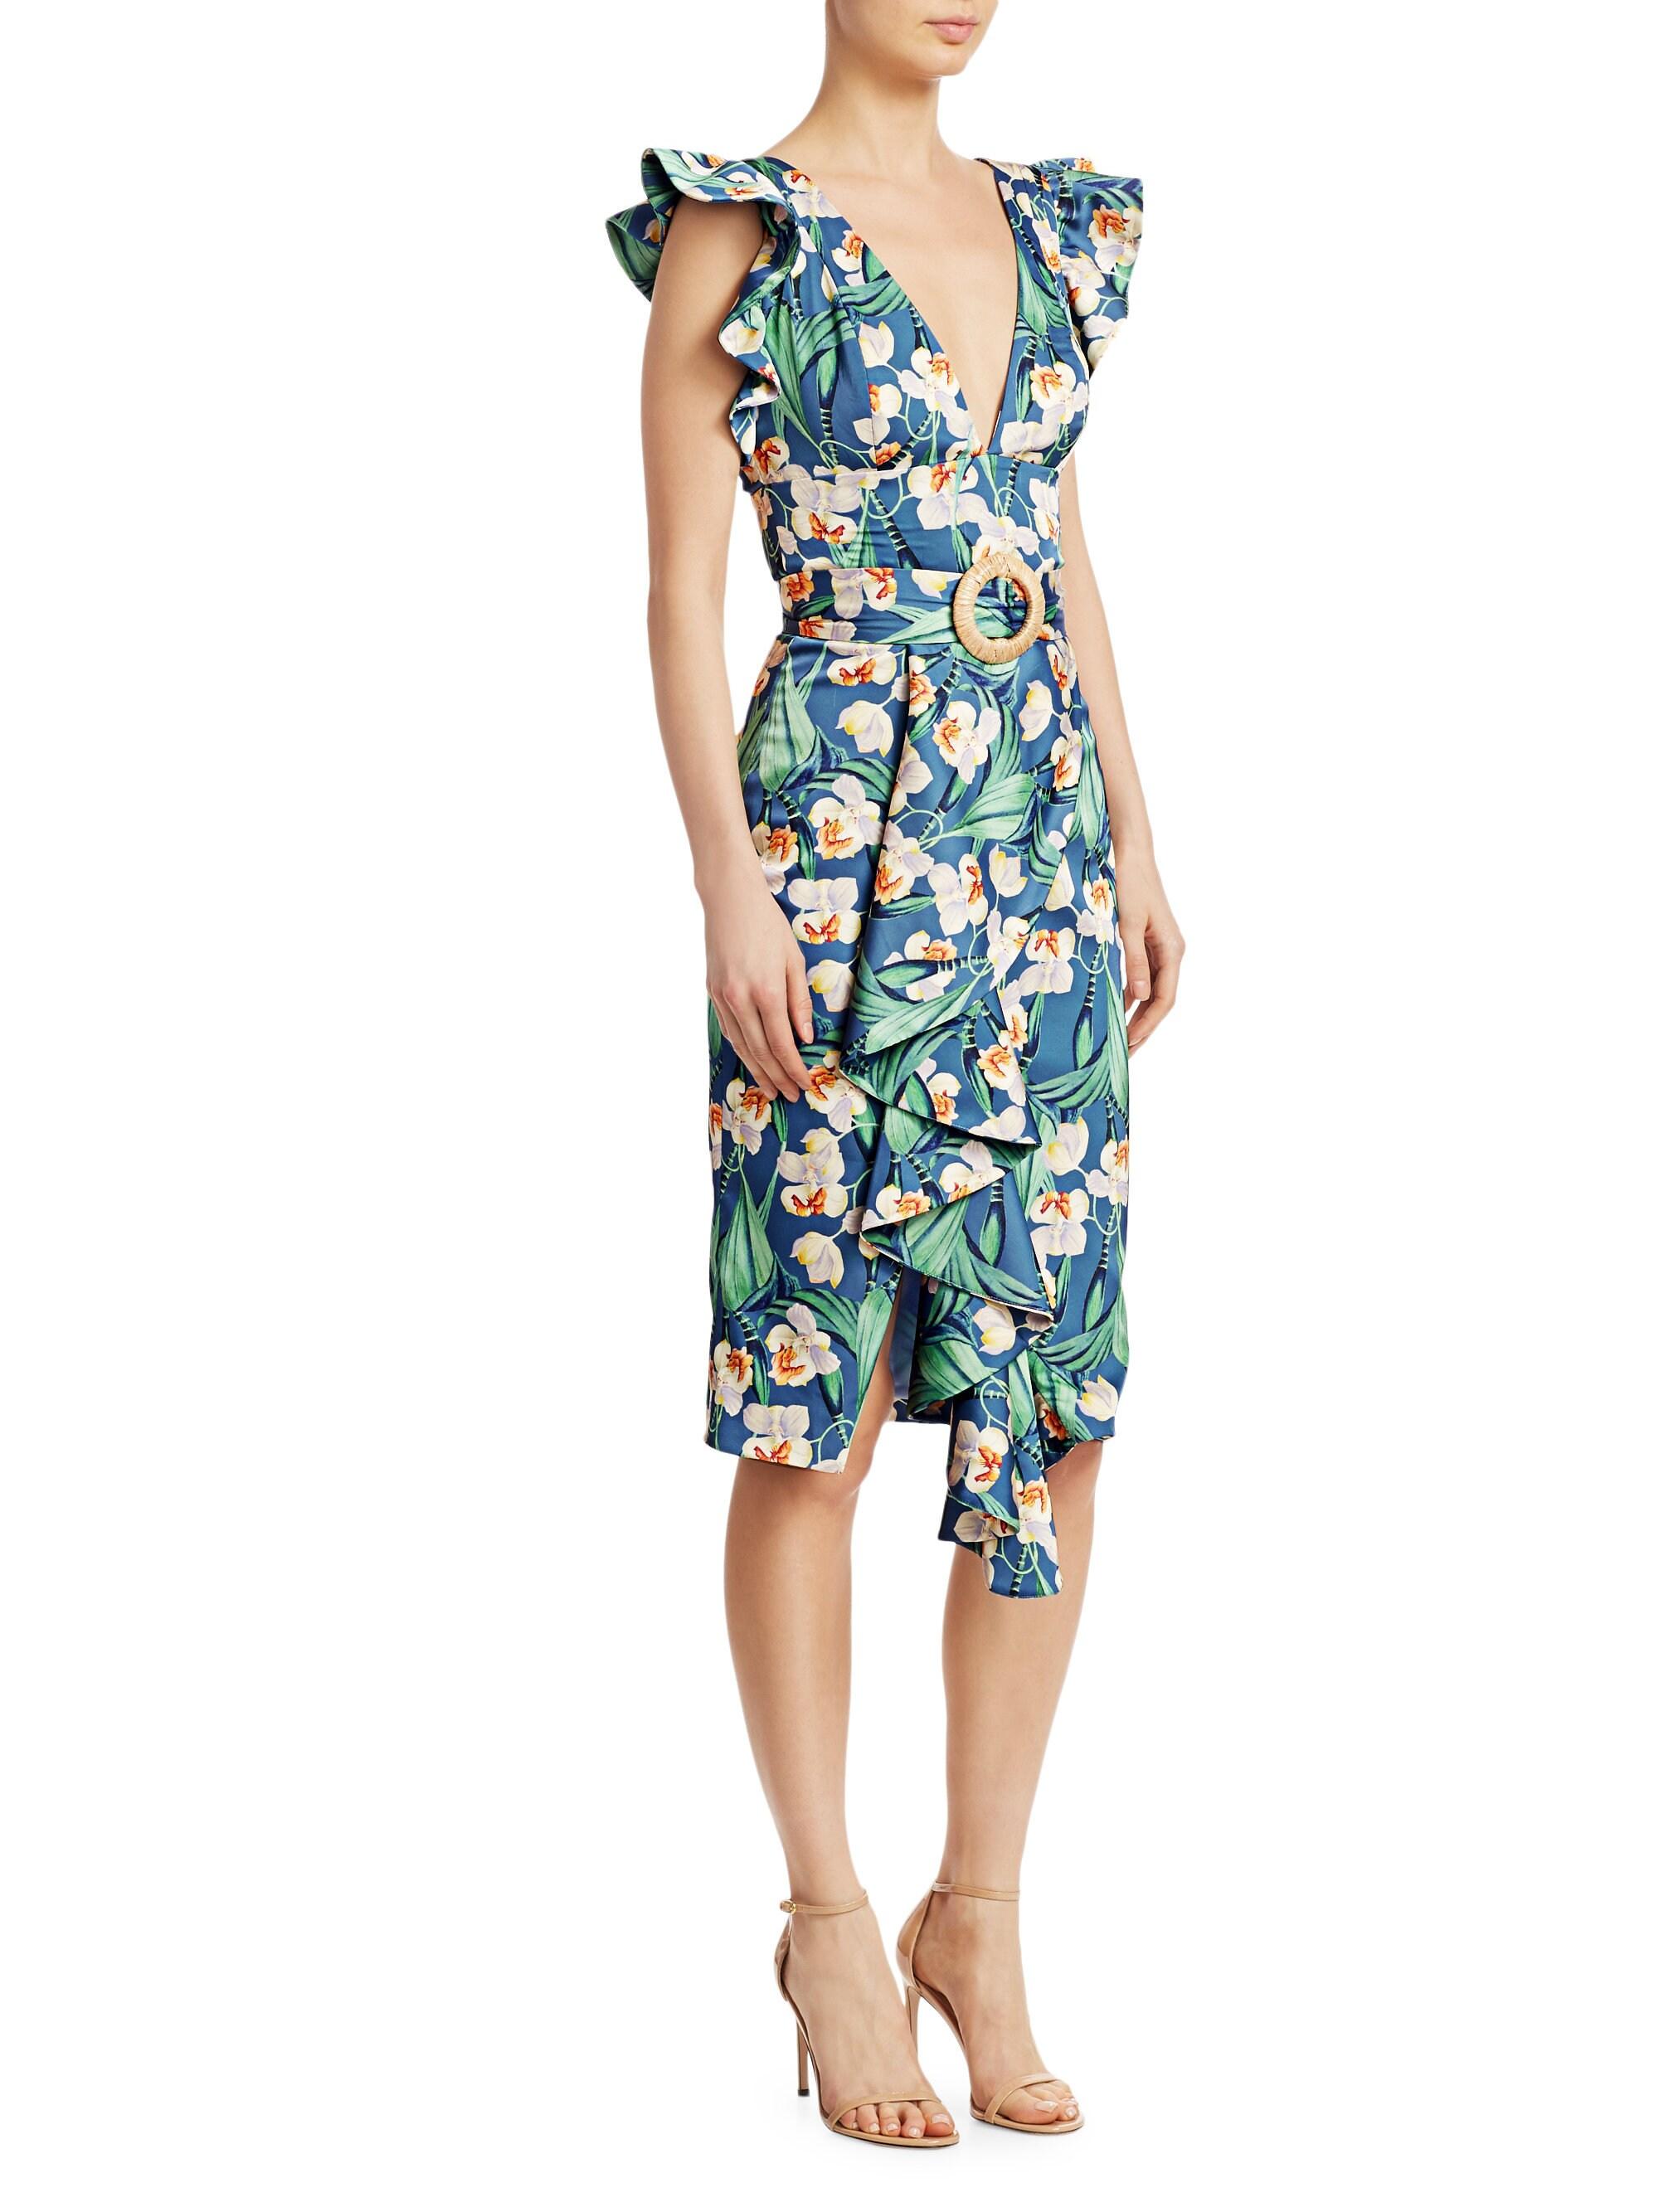 PATBO Floral Belted Midi Dress in Blue - Lyst